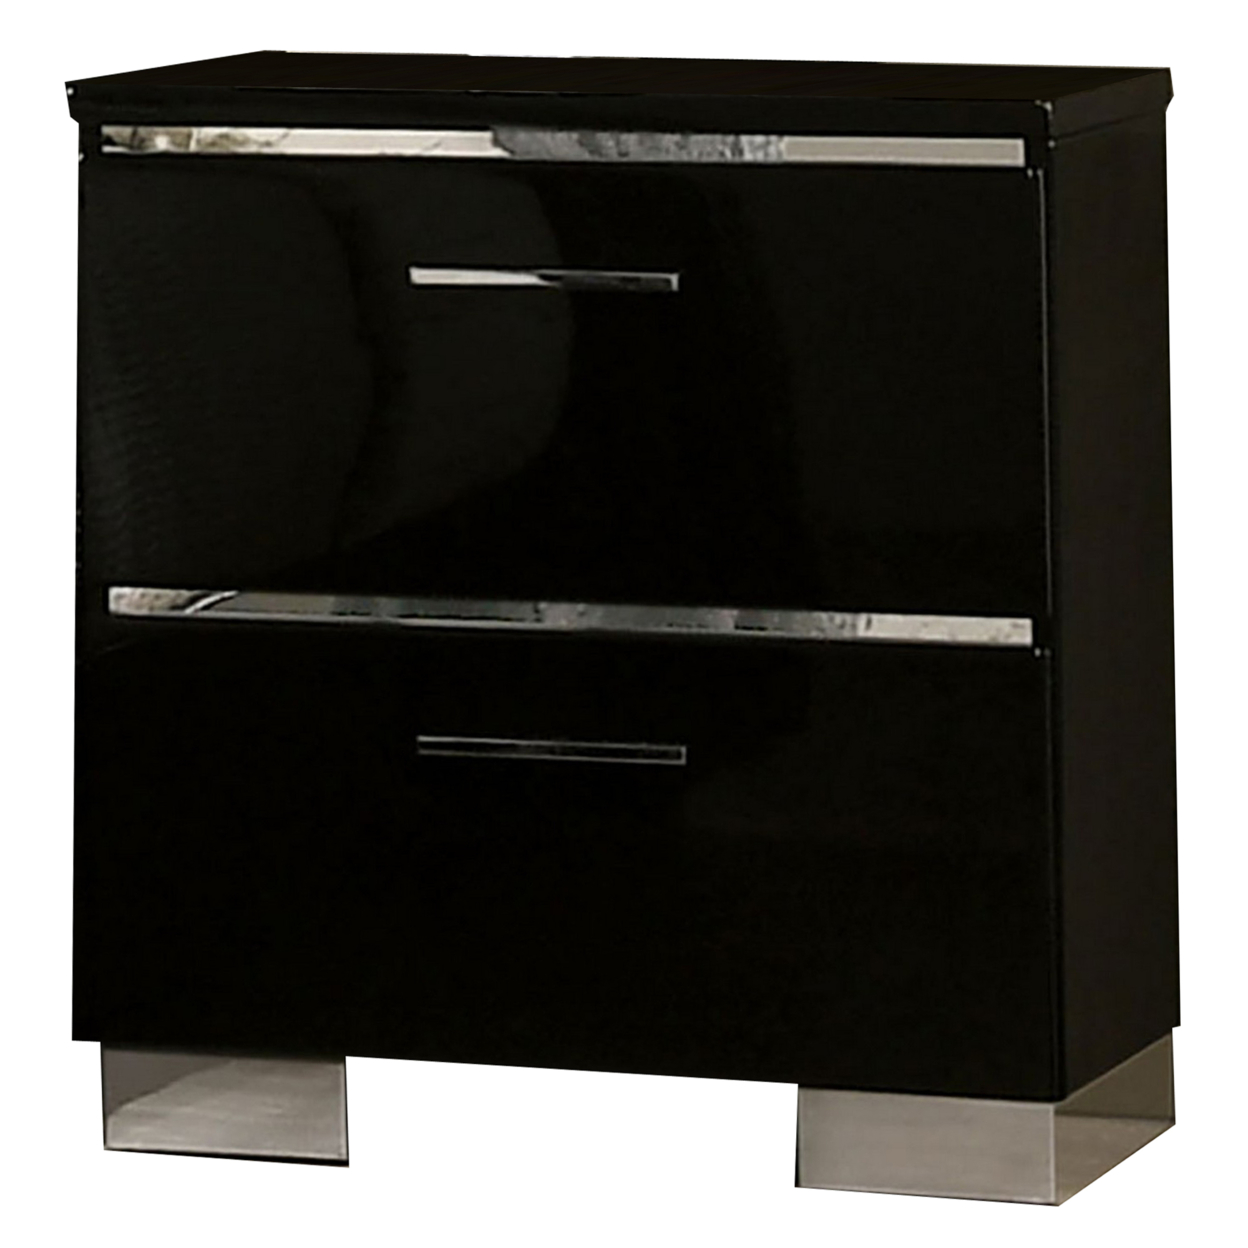 Two Drawer Nightstand With USB Charger And Bar Handle Pulls, Black- Saltoro Sherpi